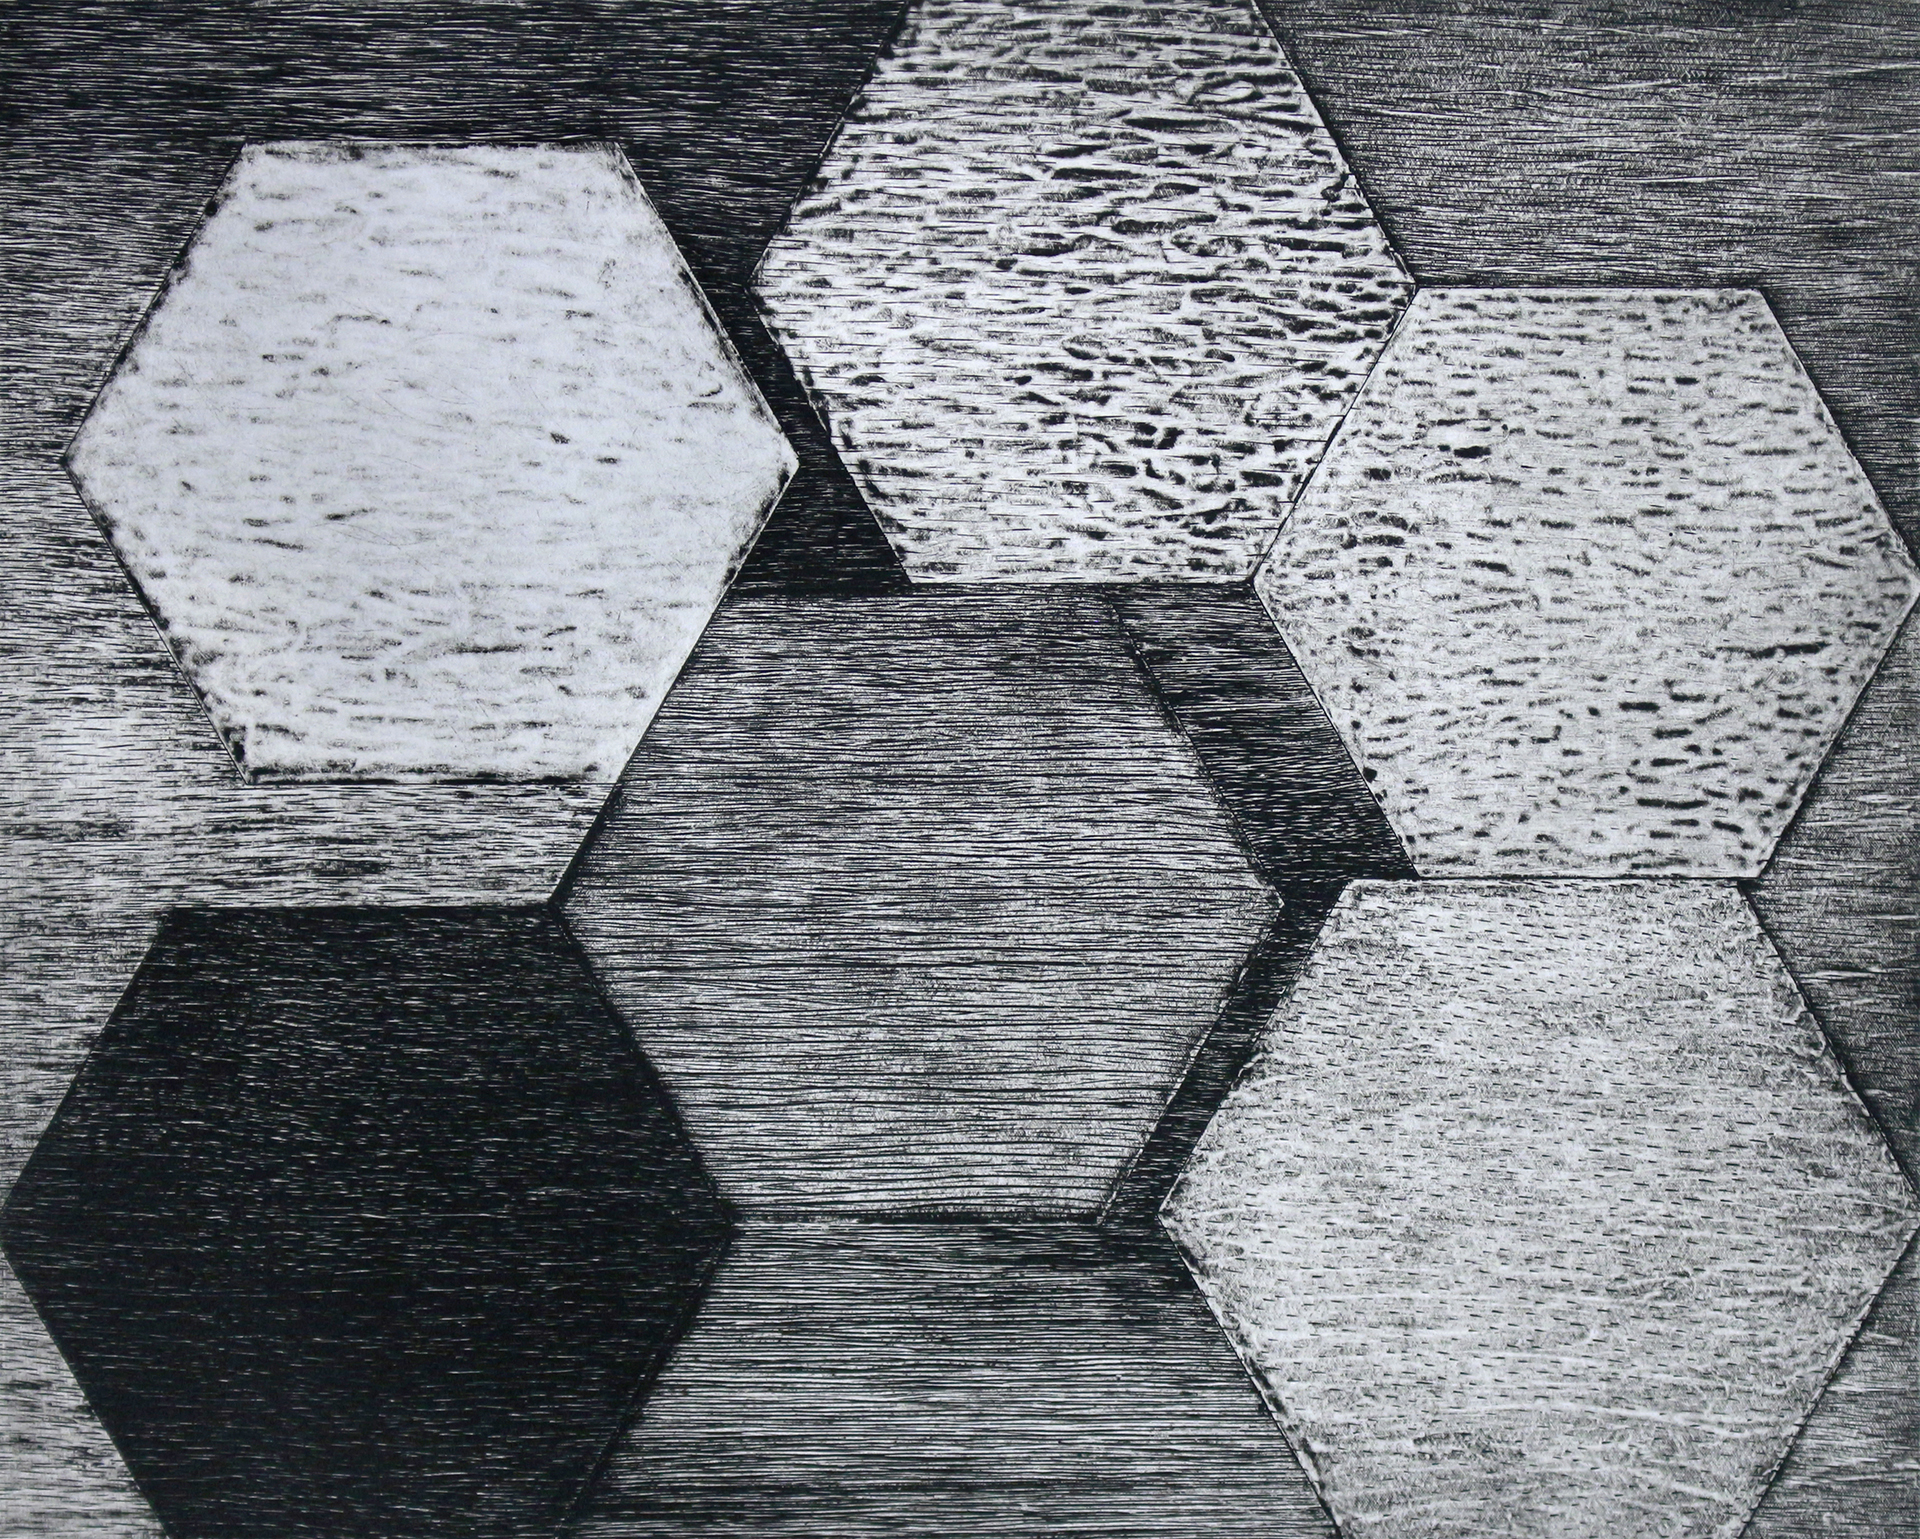 Essential Patterns of Perception: Six (6), laser & hand engraving, collagraph; 10” x 12.5”, 2019 Six hexagons in various textures are stacked offset across a woodgrain background.